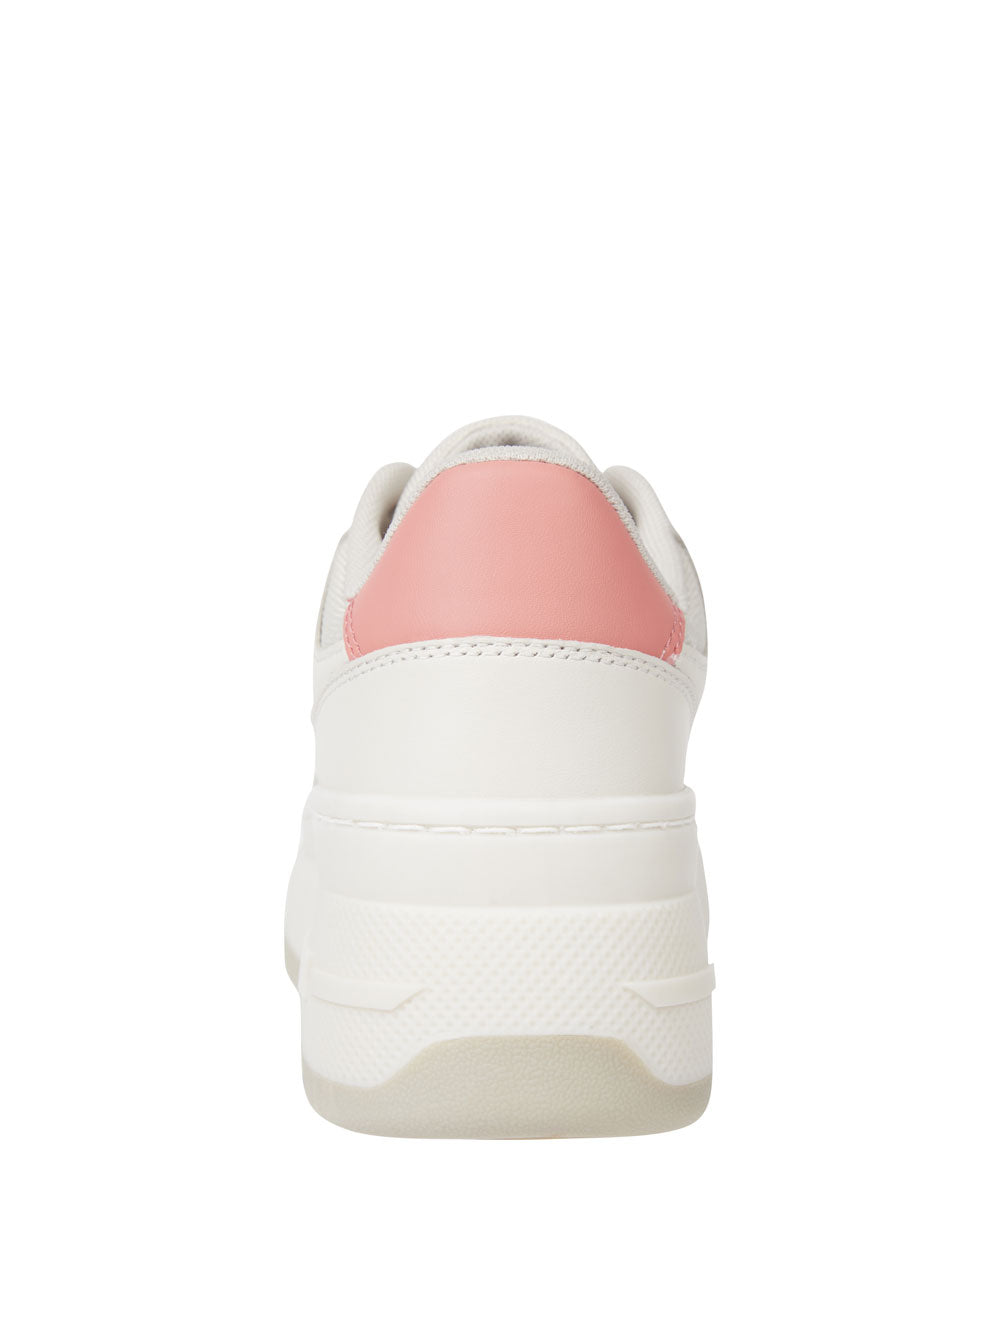 TOMMY HILFIGER Sneakers Donna - Avorio